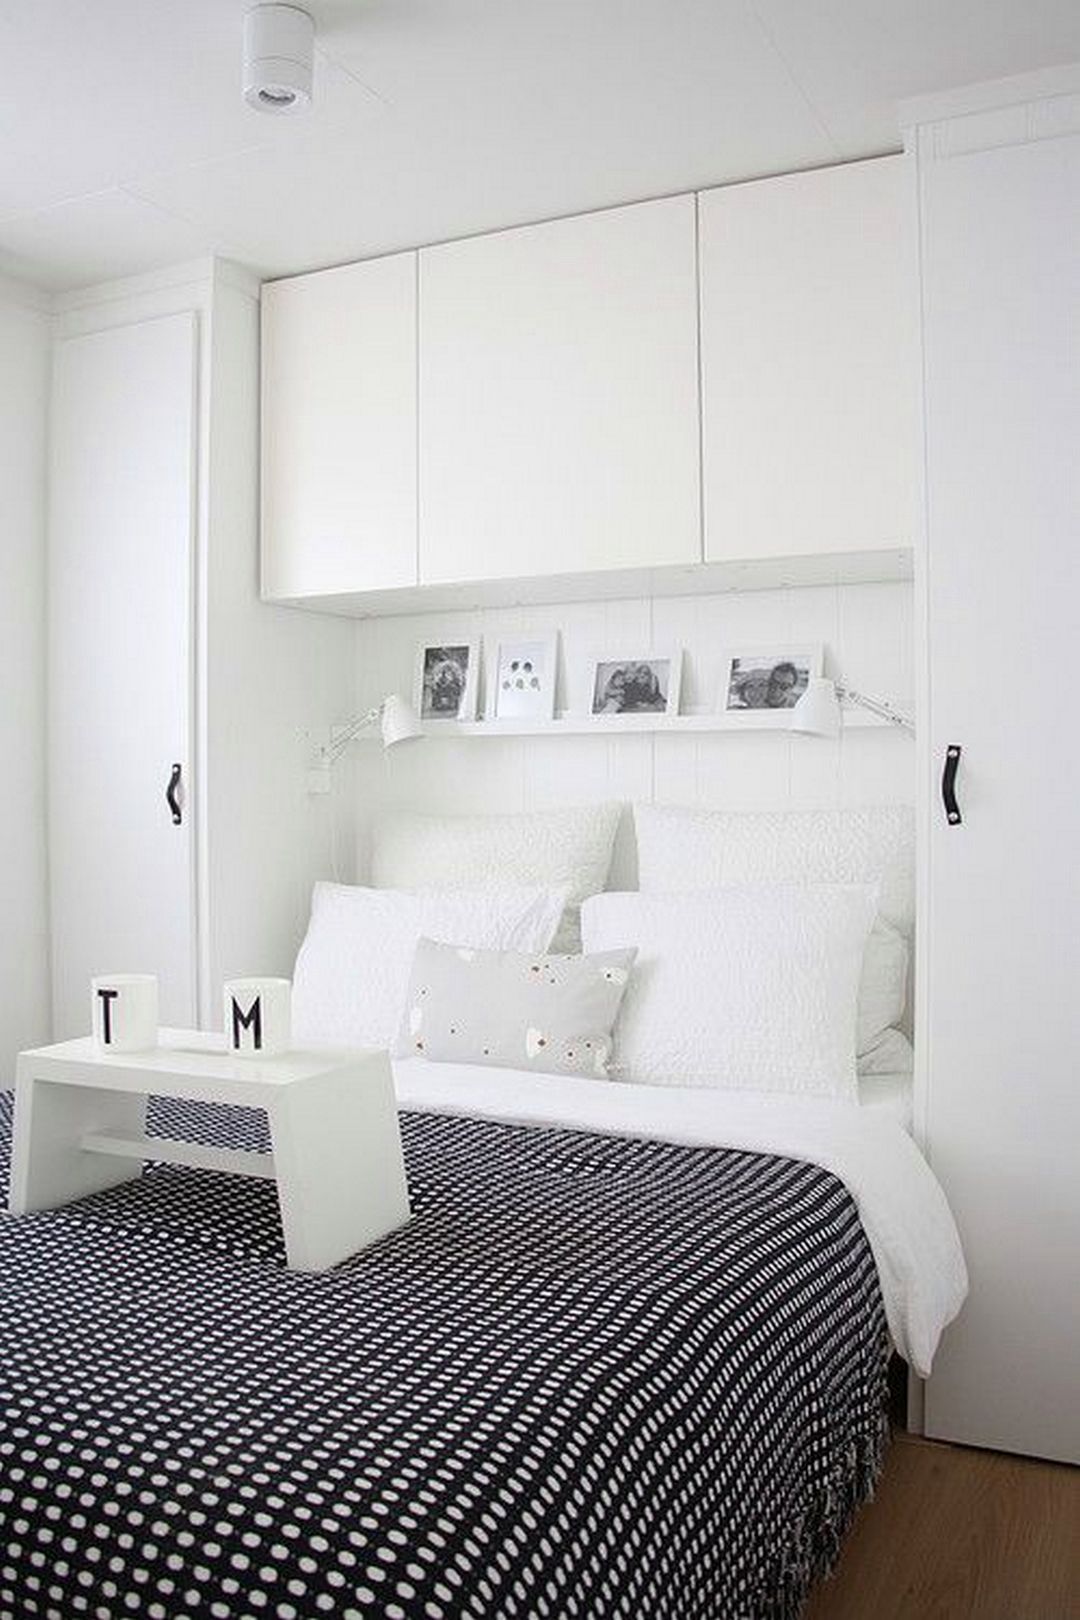 Awesome Bedroom Storage Design Ideas